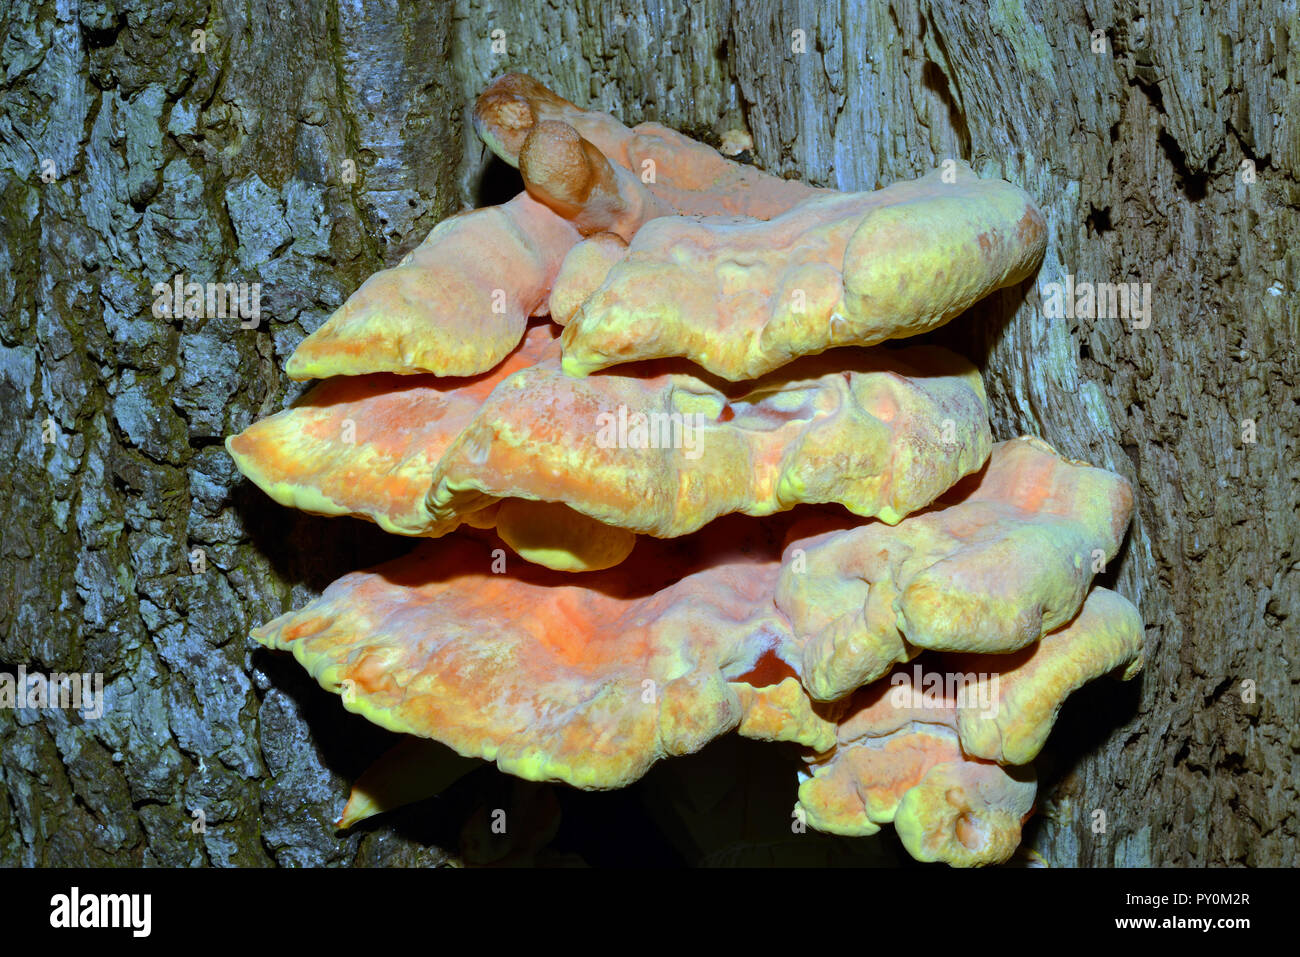 Laetiporus sulphureus (sulphur polypore) is a species of bracket fungus found in Europe and North America. It can be parasitic. Stock Photo